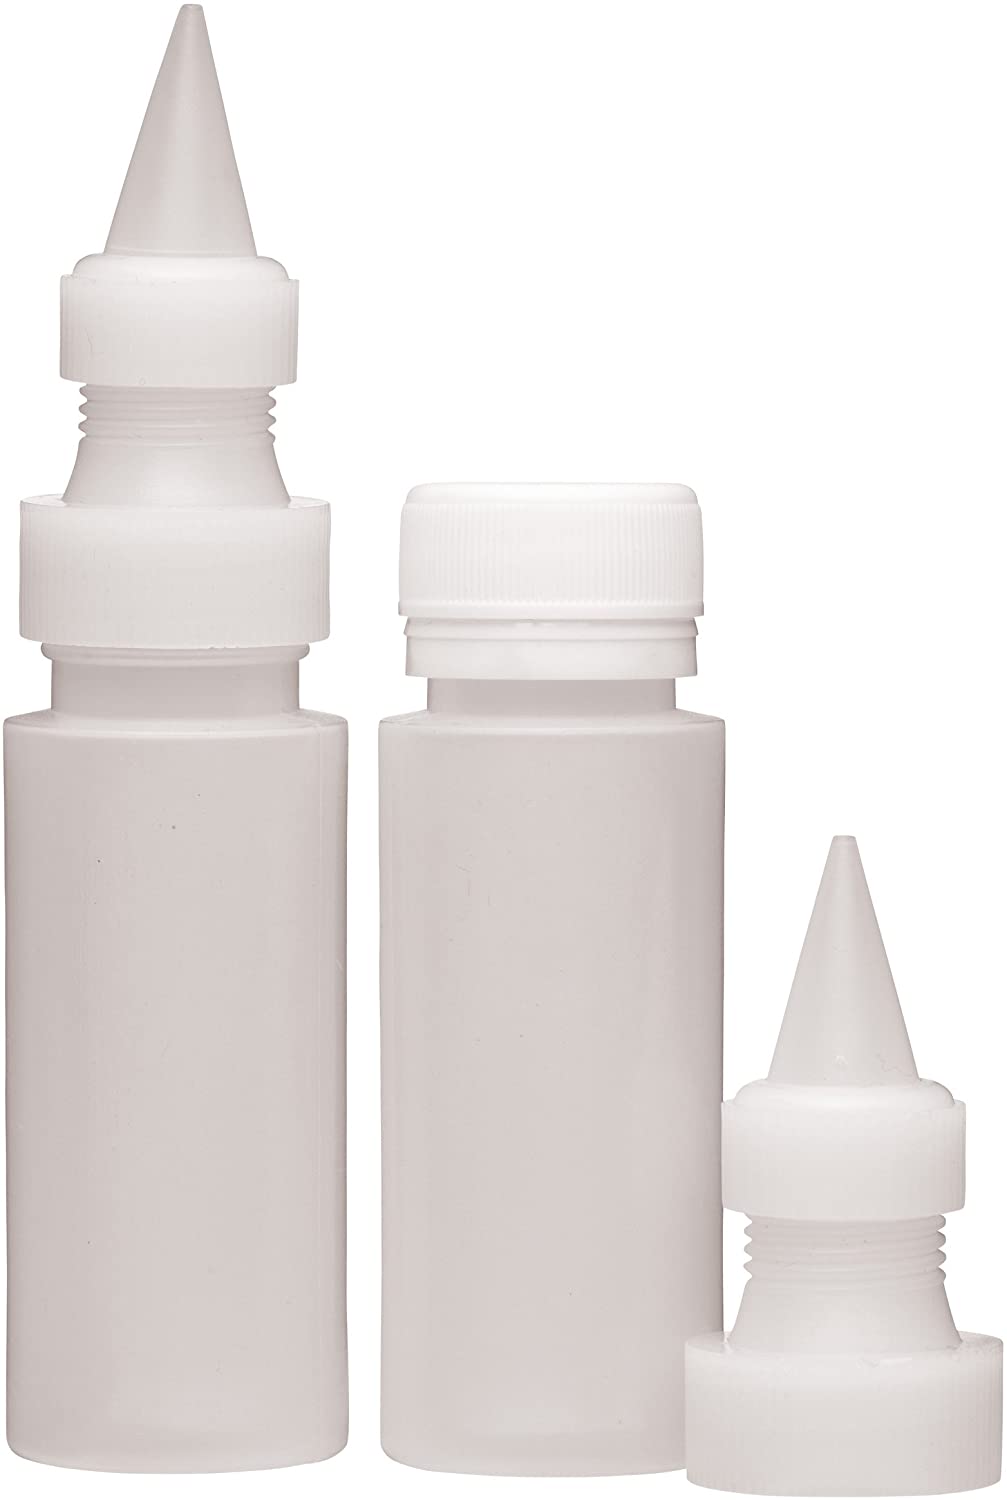 KitchenCraft Sweetly Does It Icing Bottles, Set of 2